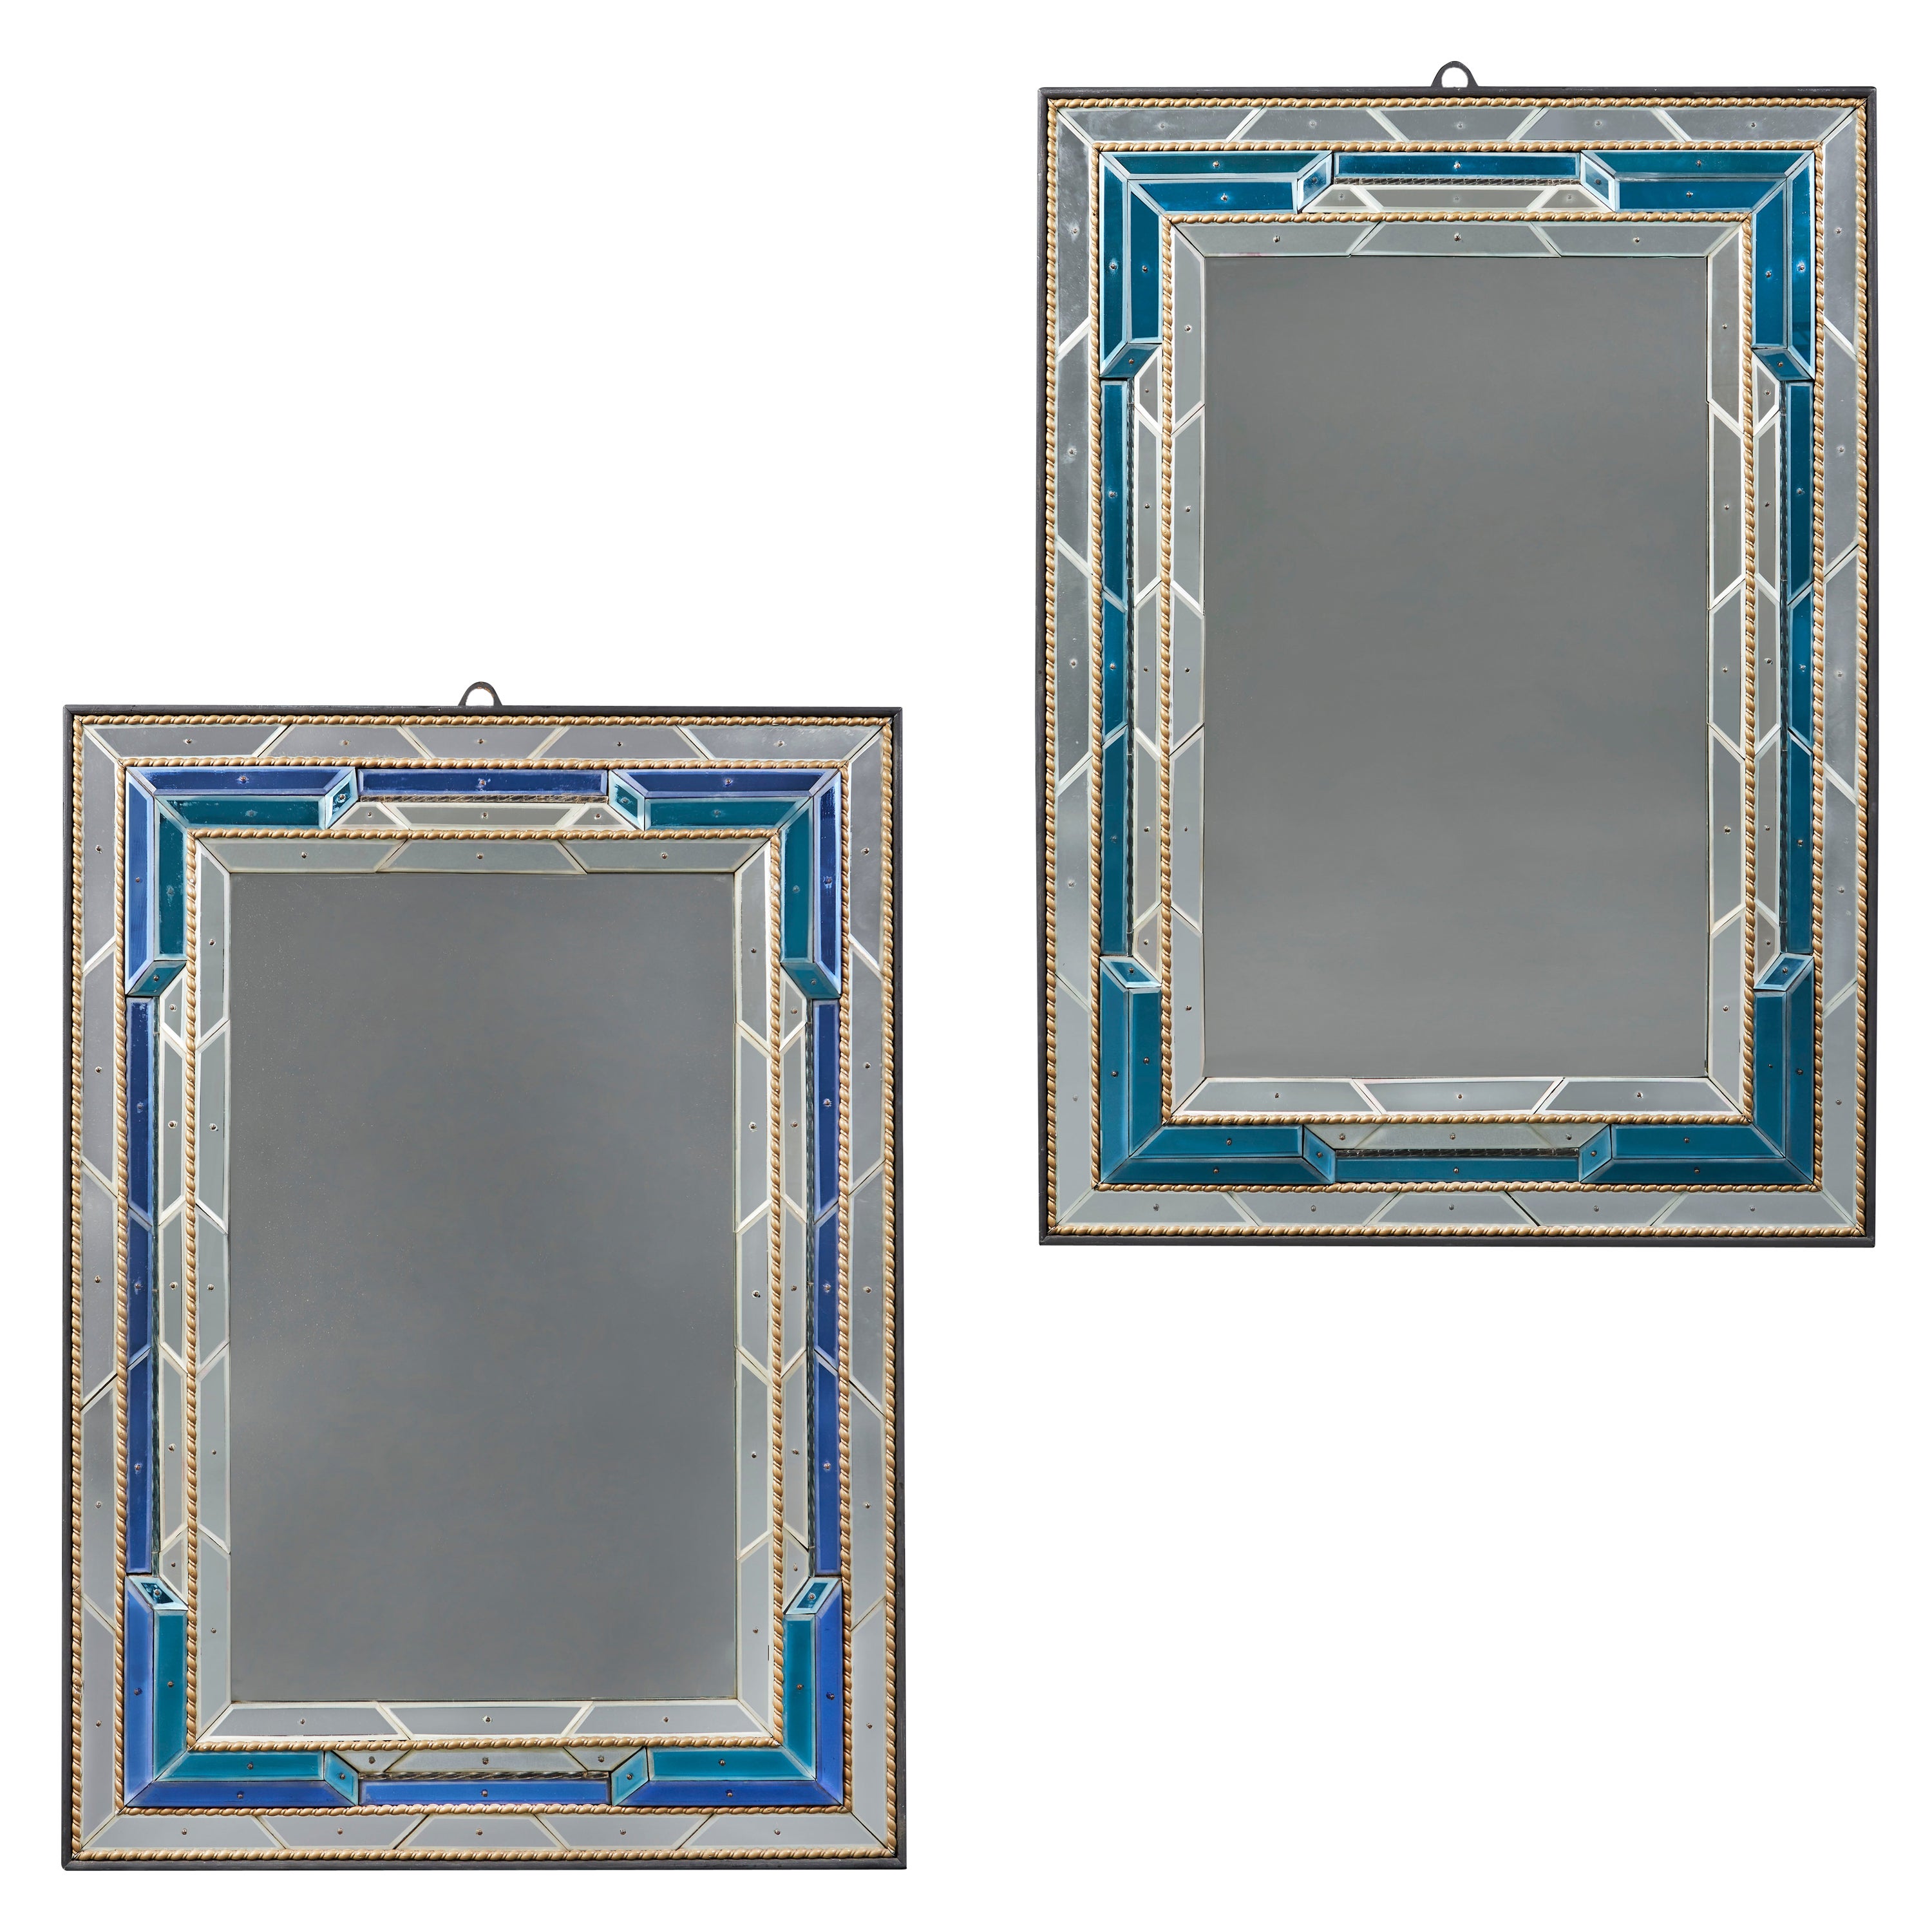 A Matched Pair of Overscale Mid-Century Venetian Mirrors with Blue Border